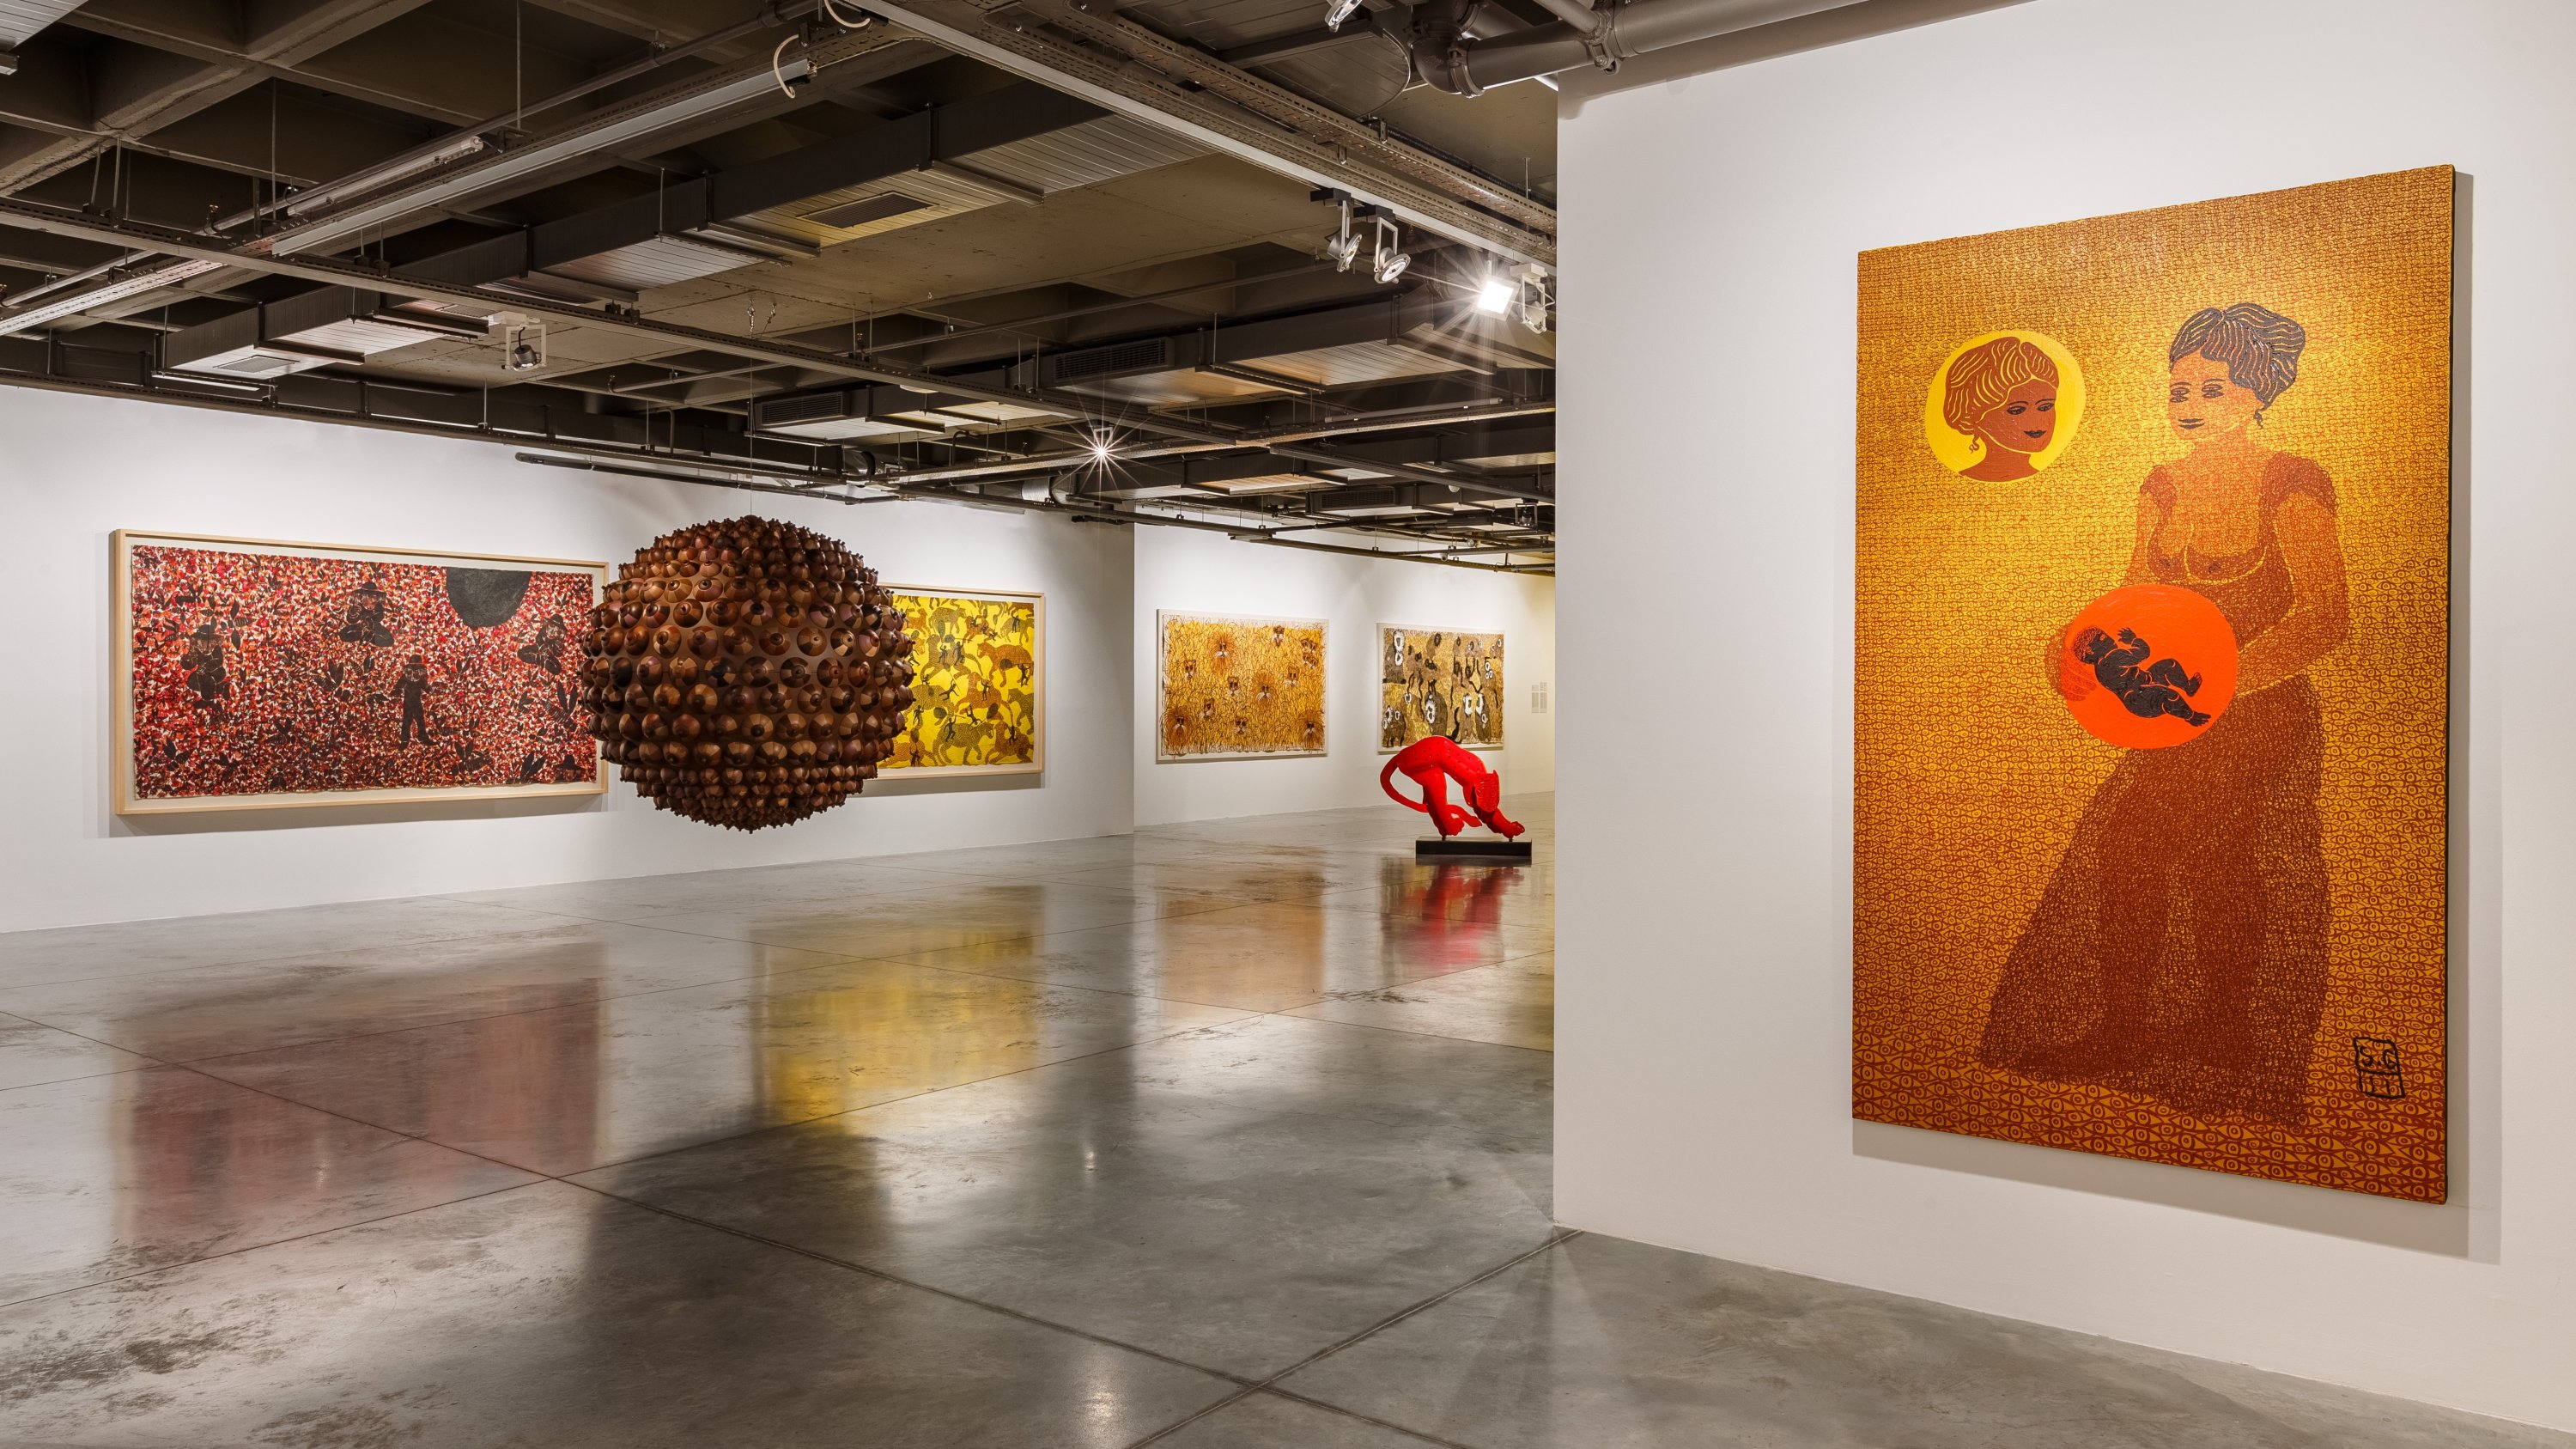 The exhibition 'This Place We Call World' by Selma Gürbüz at Istanbul Modern, Istanbul, Turkey. (Courtesy of Istanbul Modern)